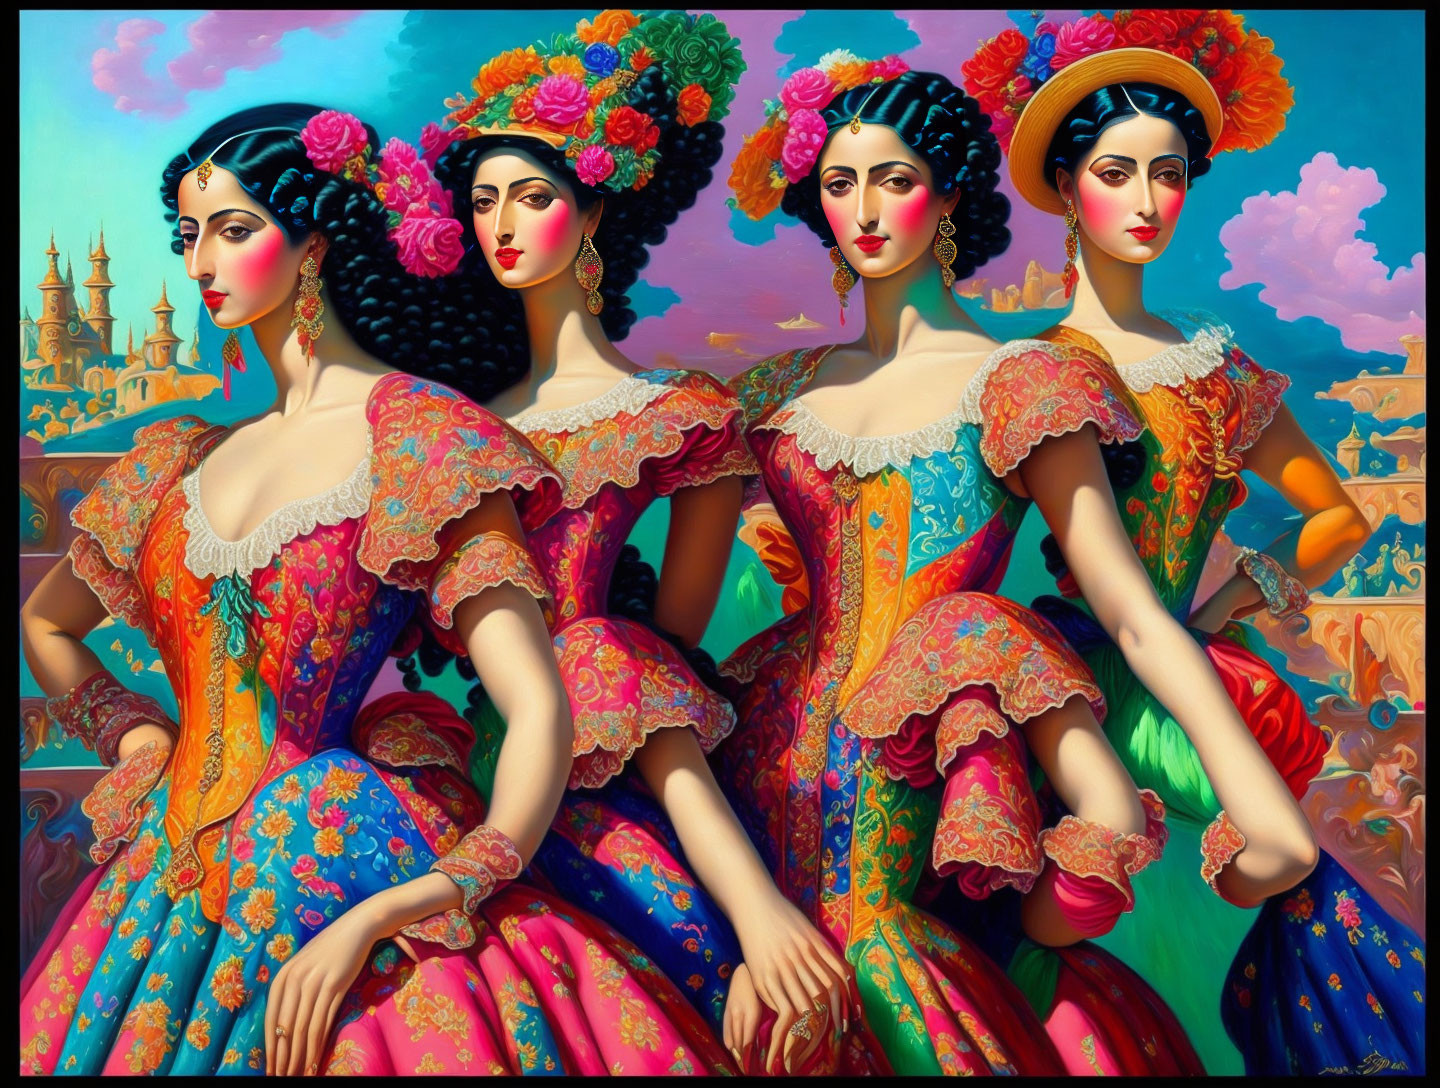 Three women in vibrant Mexican dresses with floral patterns and elaborate hairstyles against colorful background